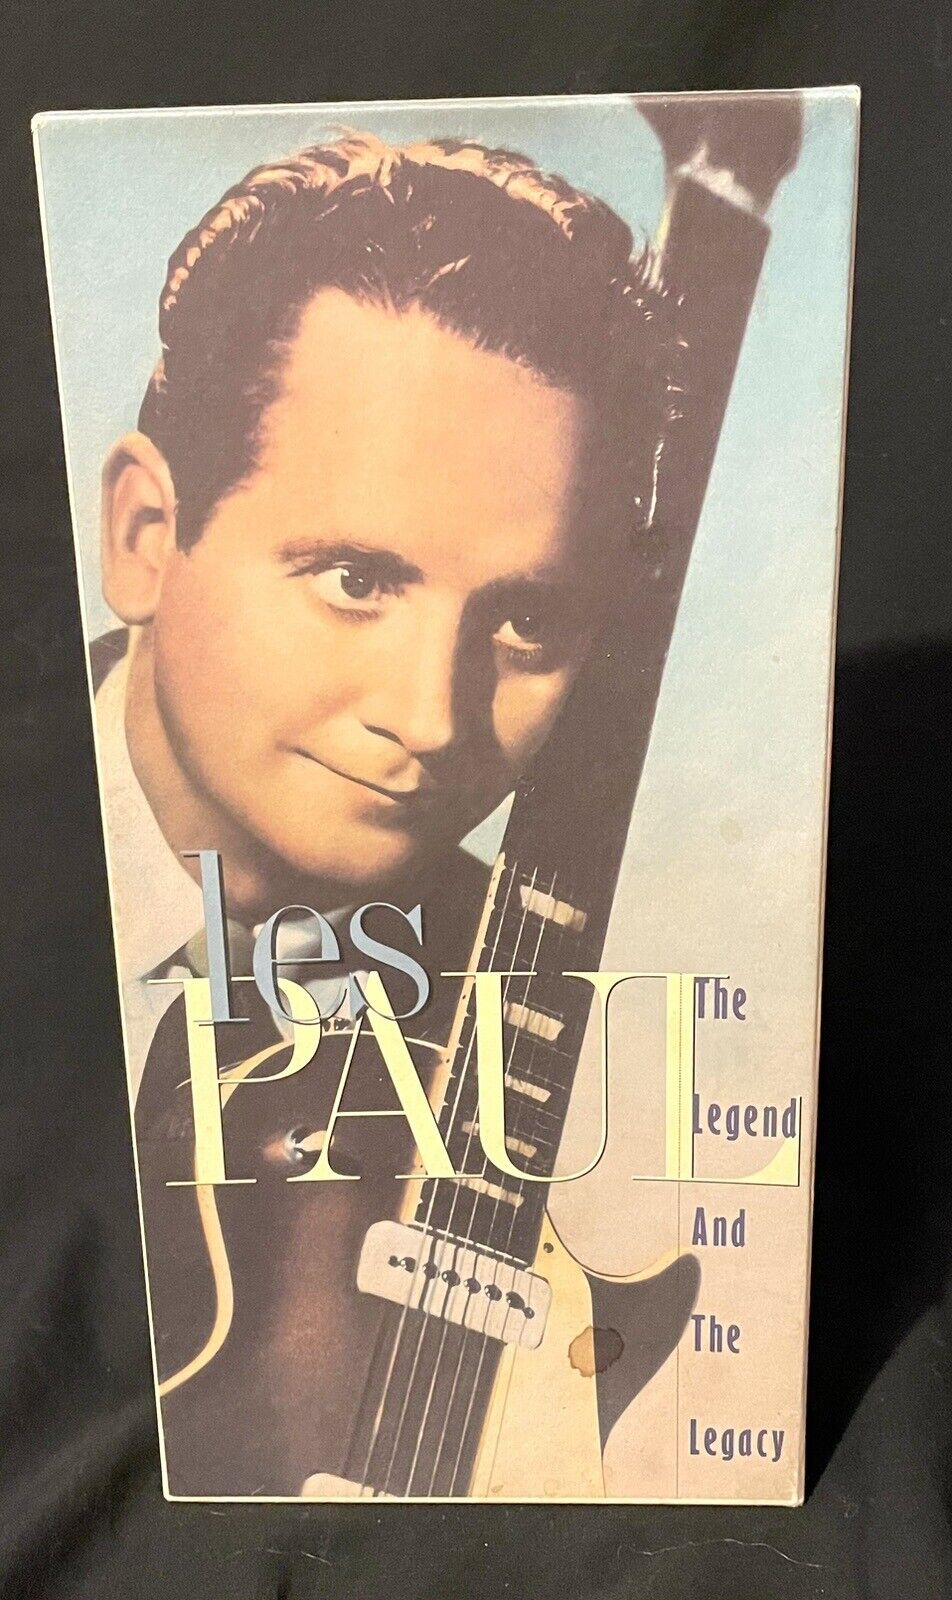 Les Paul  Legend and The Legacy  Box Set 4 CD's Greatest Hits